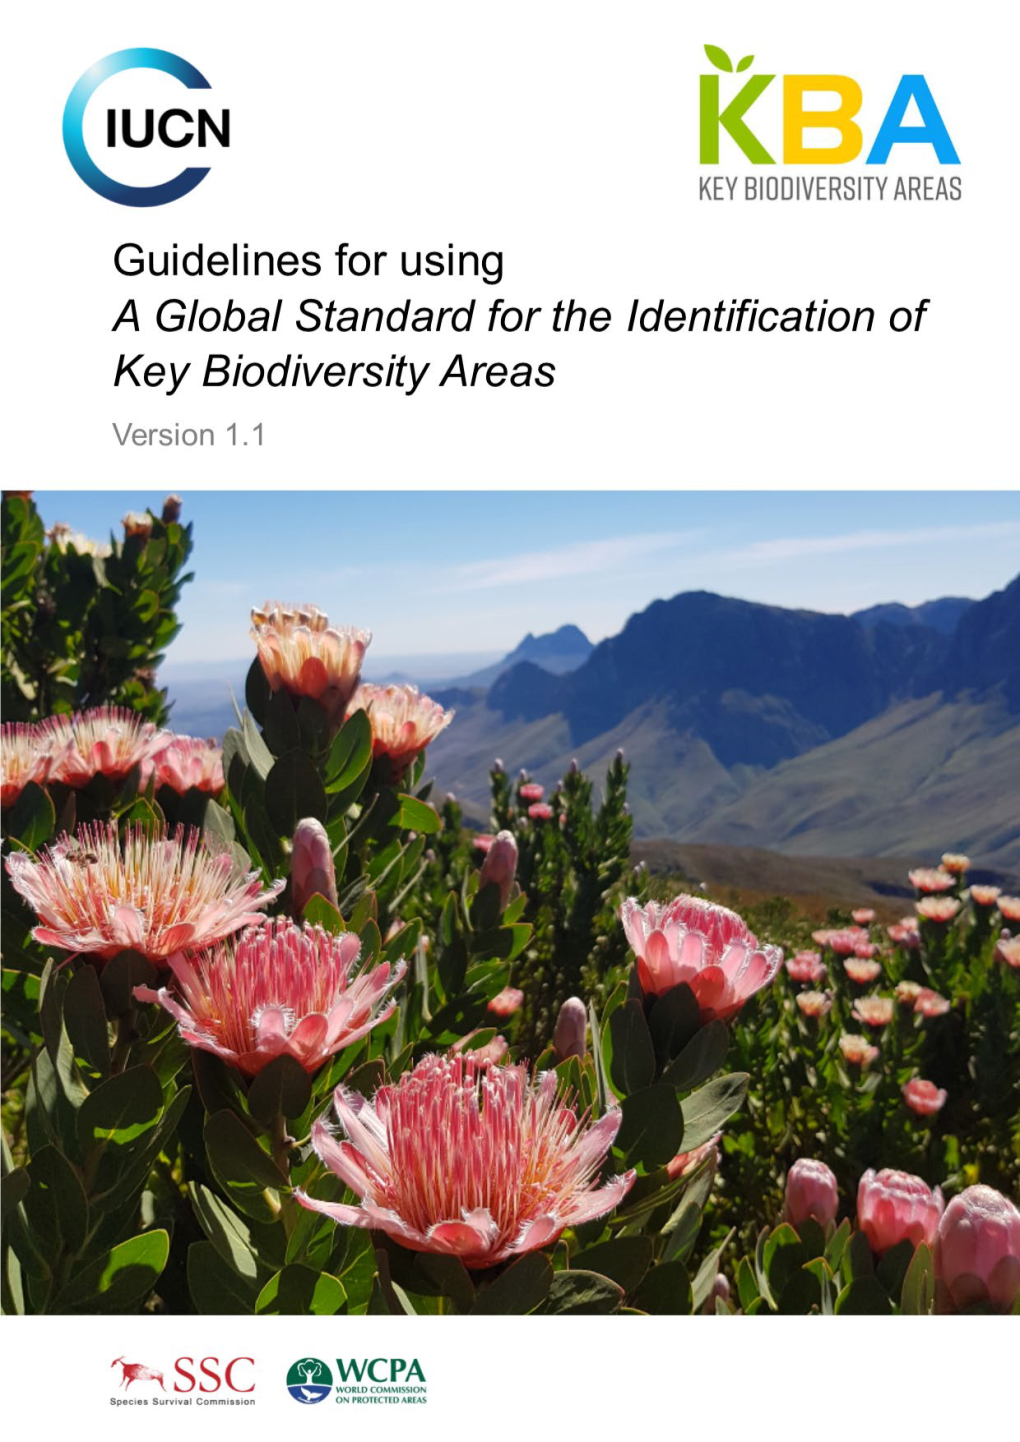 Guidelines for Using a Global Standard for the Identification of Key Biodiversity Areas